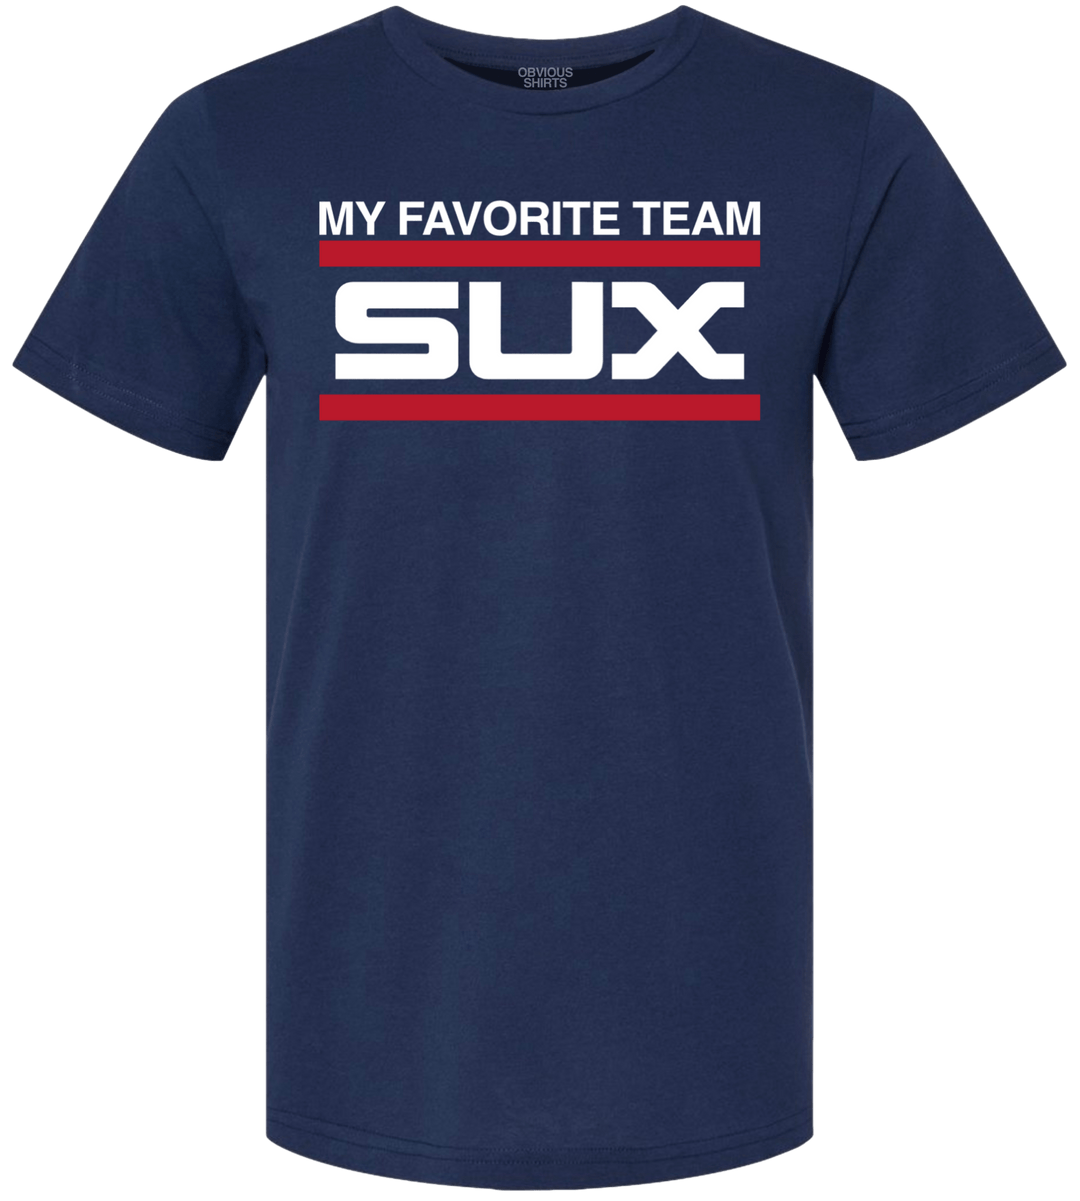 MY FAVORITE TEAM SUX. - OBVIOUS SHIRTS